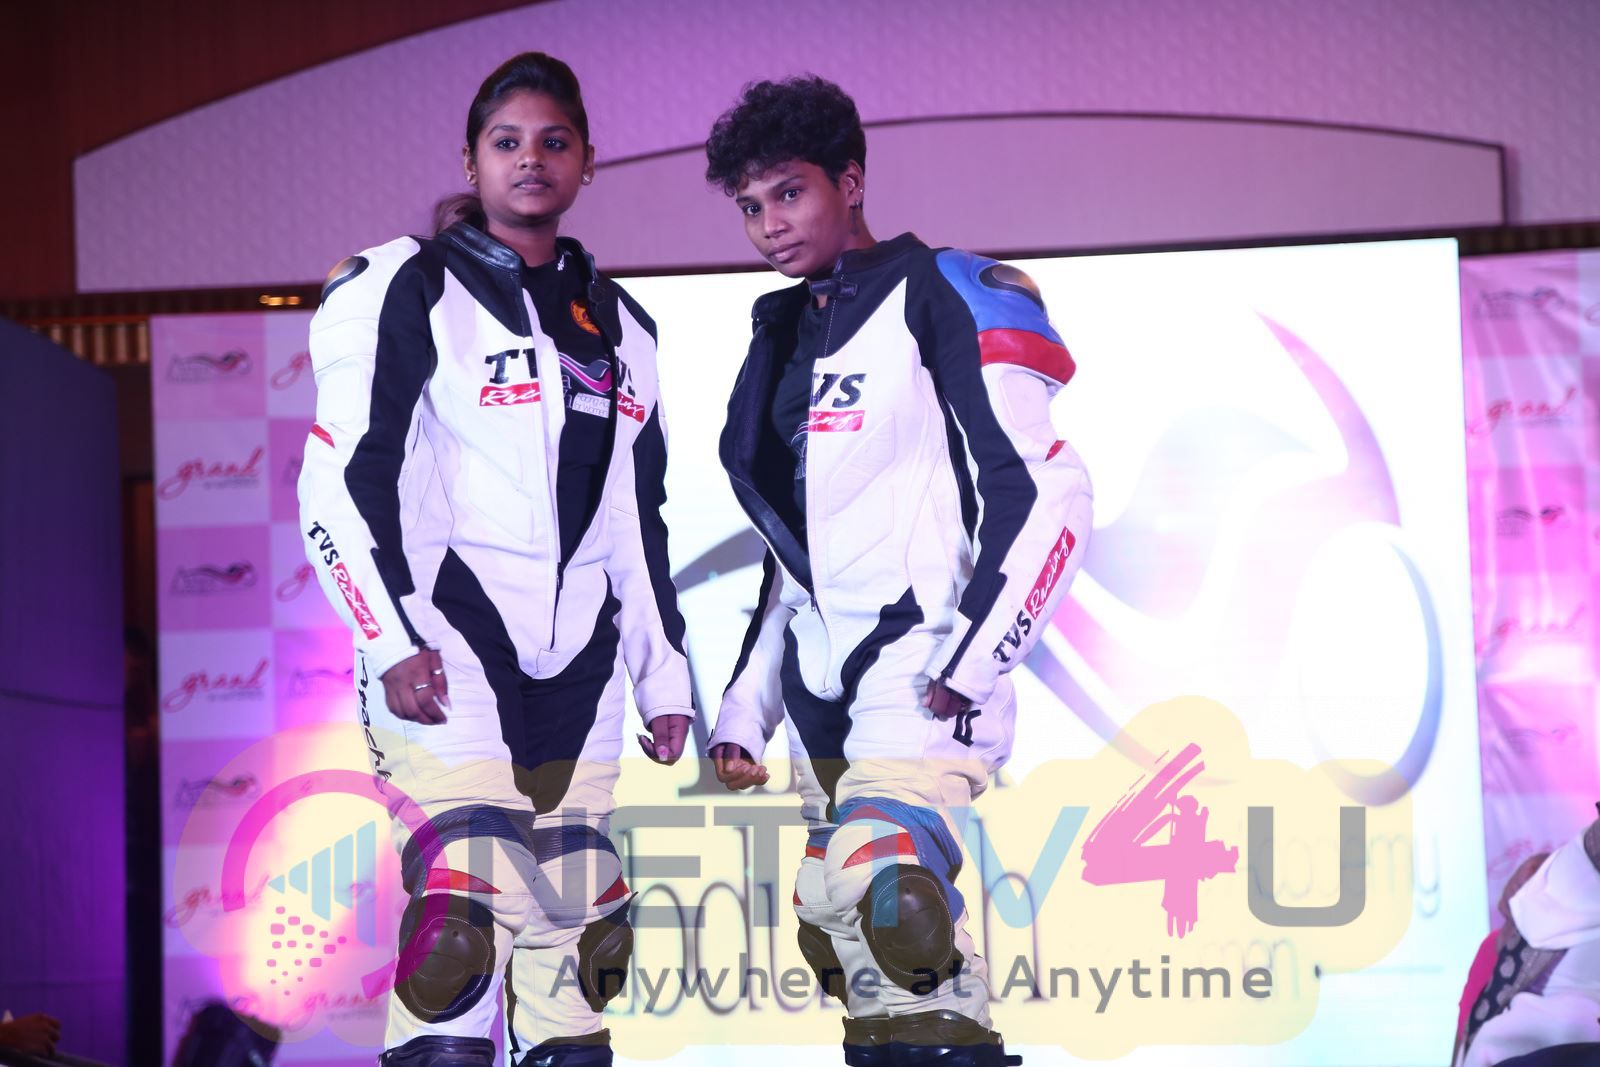  India's First Women Racing Team Launch Charming Photos Tamil Gallery